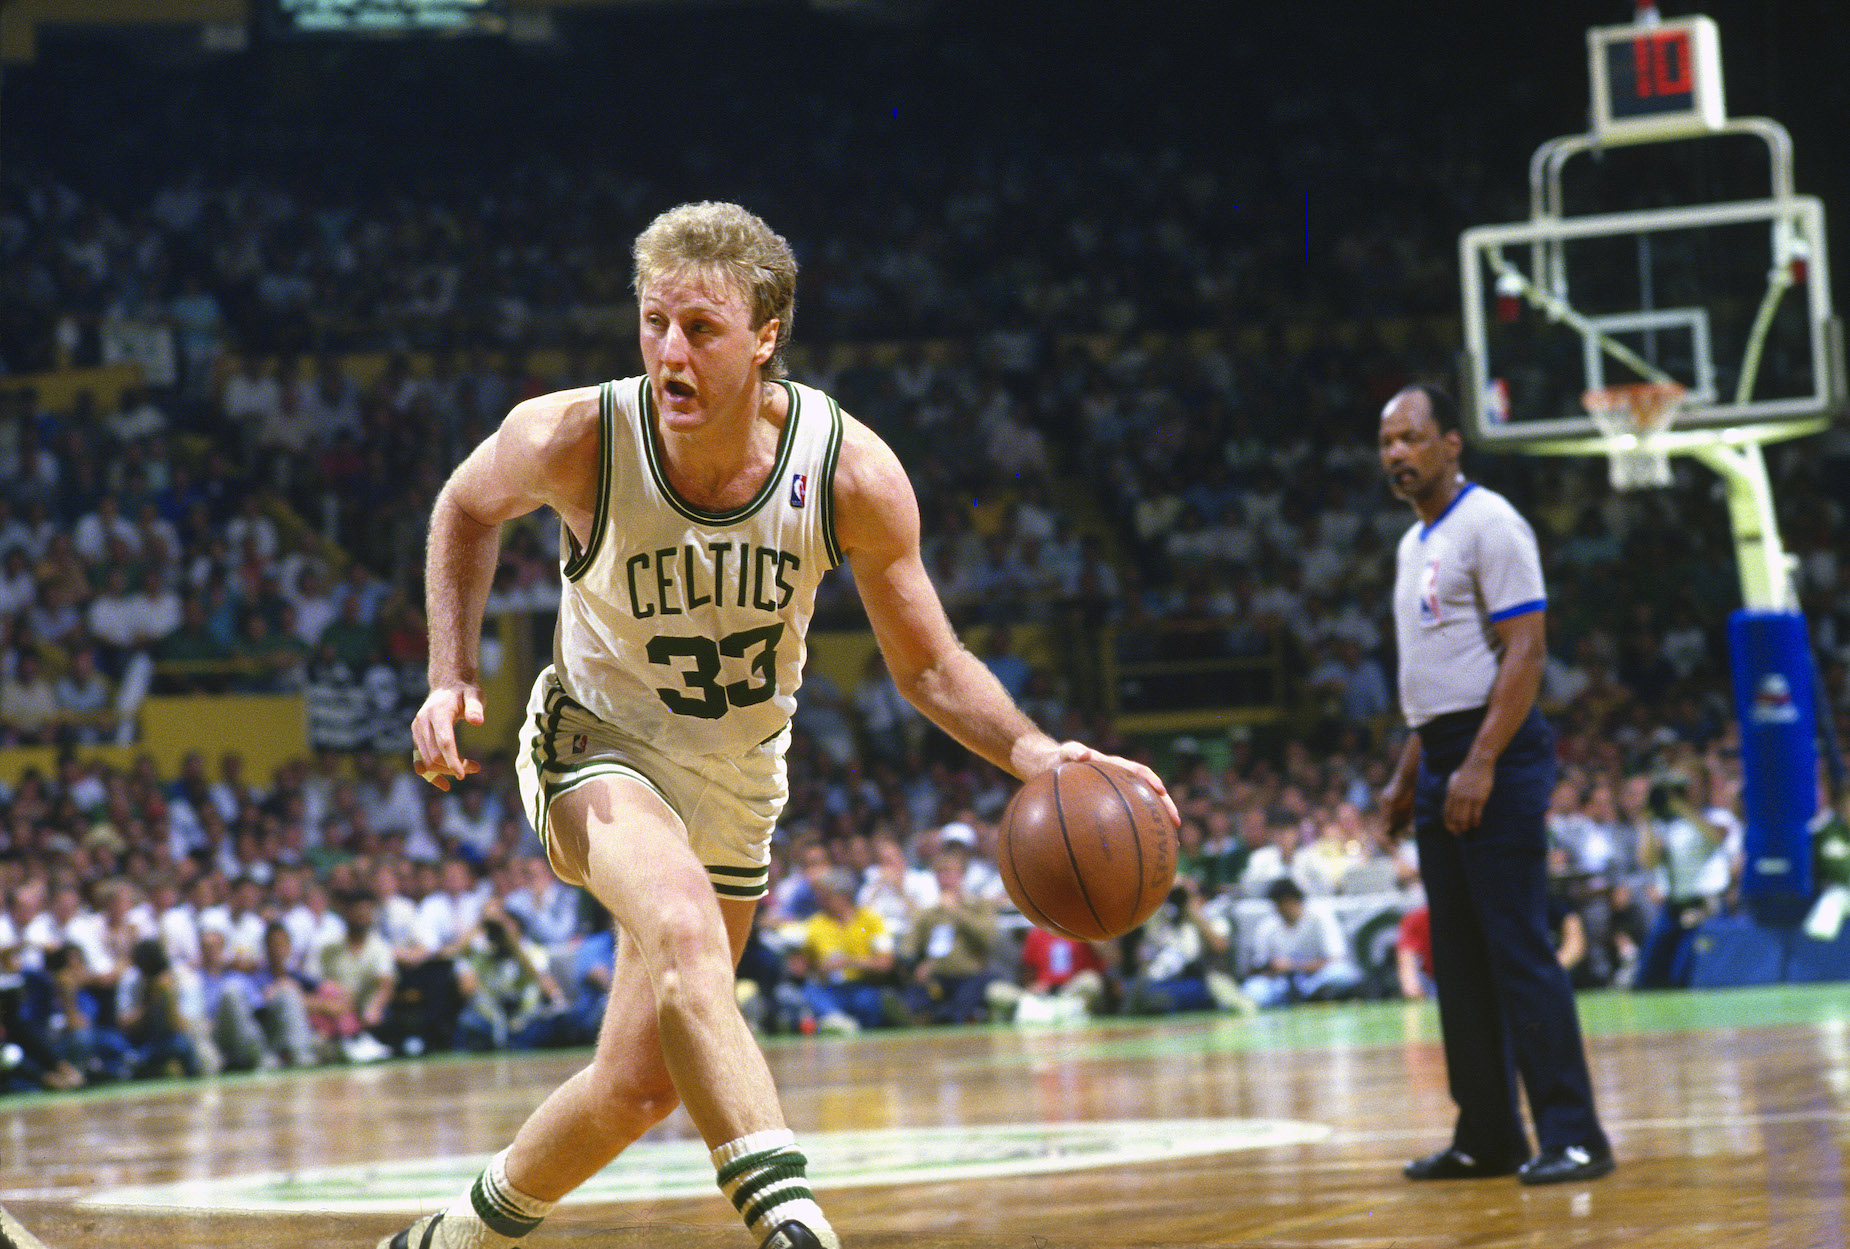 Within a week of reporting for Celtics training camp, Larry Bird knew he was ready for NBA greatness.